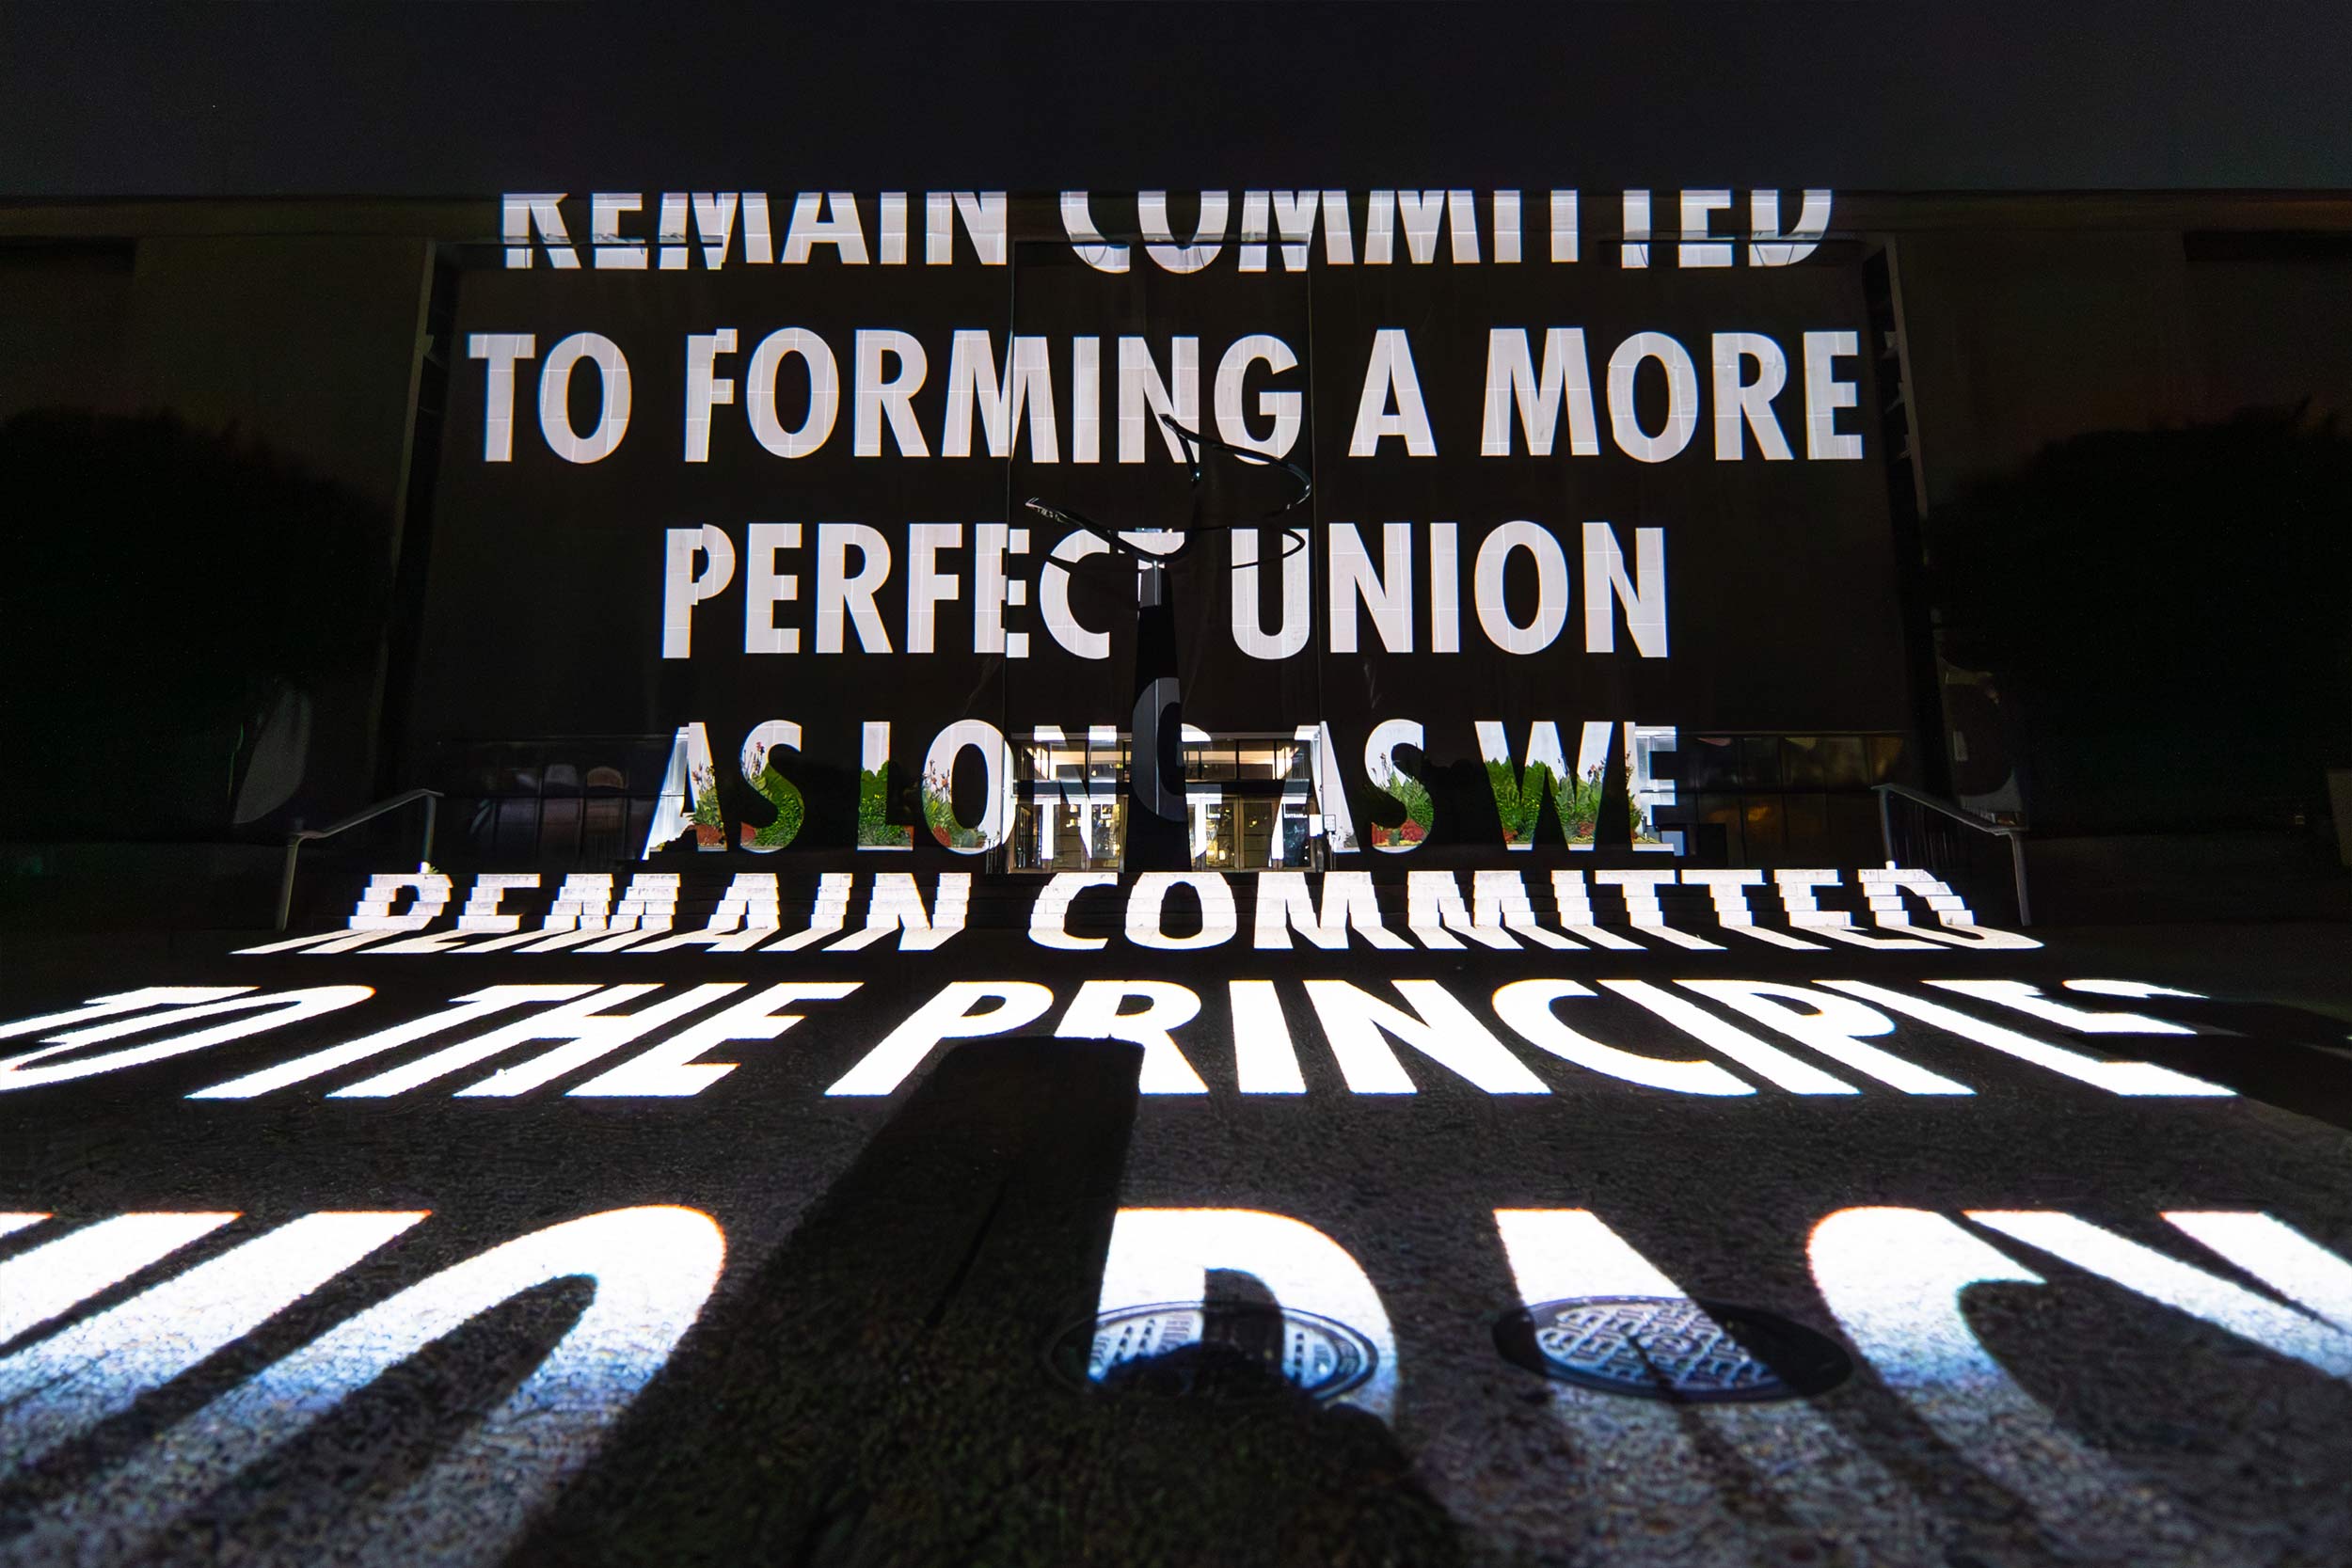 The following words are projected onto the ground and on a wall surrounding stairs and two sets of doors at the National Mall: "Remain Committed to forming a more perfect union as long as we remain committed to the principles [of] democracy..."